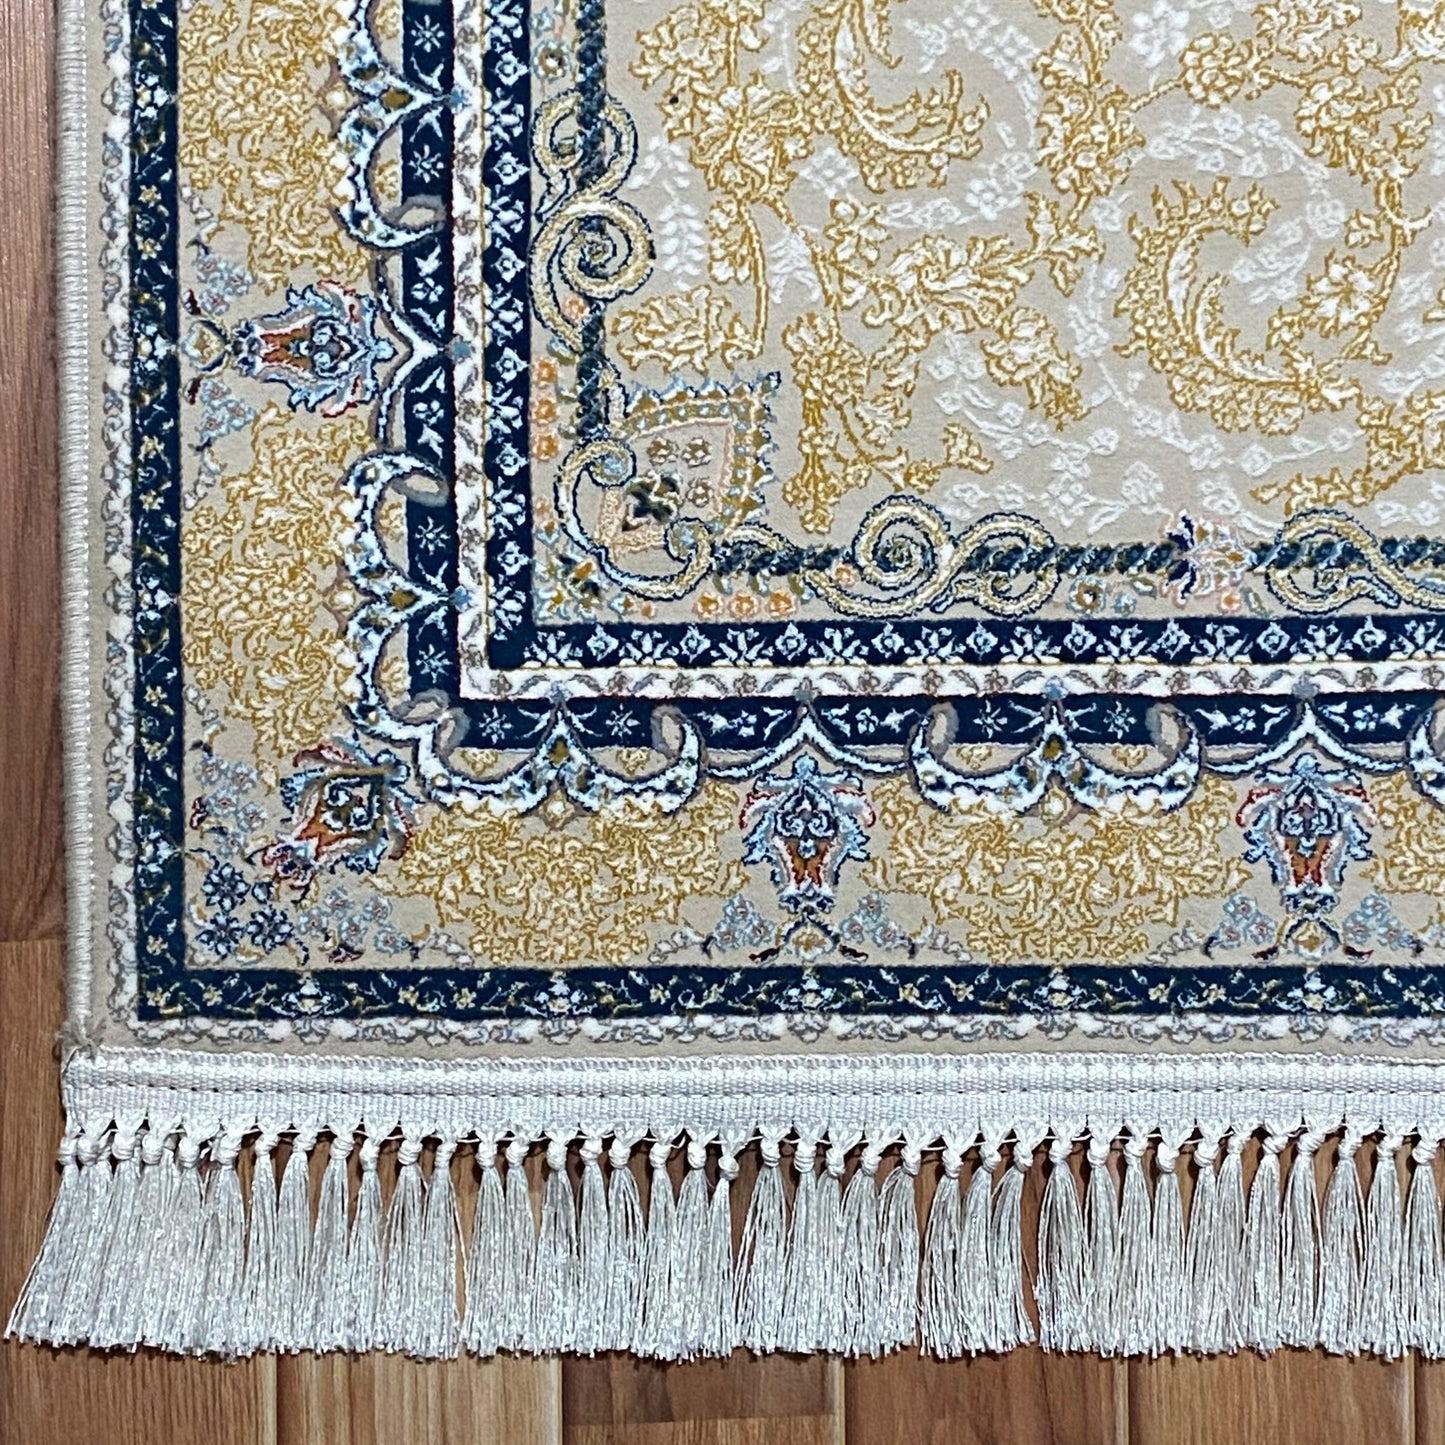 3 ft x 13 ft - Runner - Persian 1200 Reeds - Gul Nafis Kashan 1 - Beige and Multi Colors